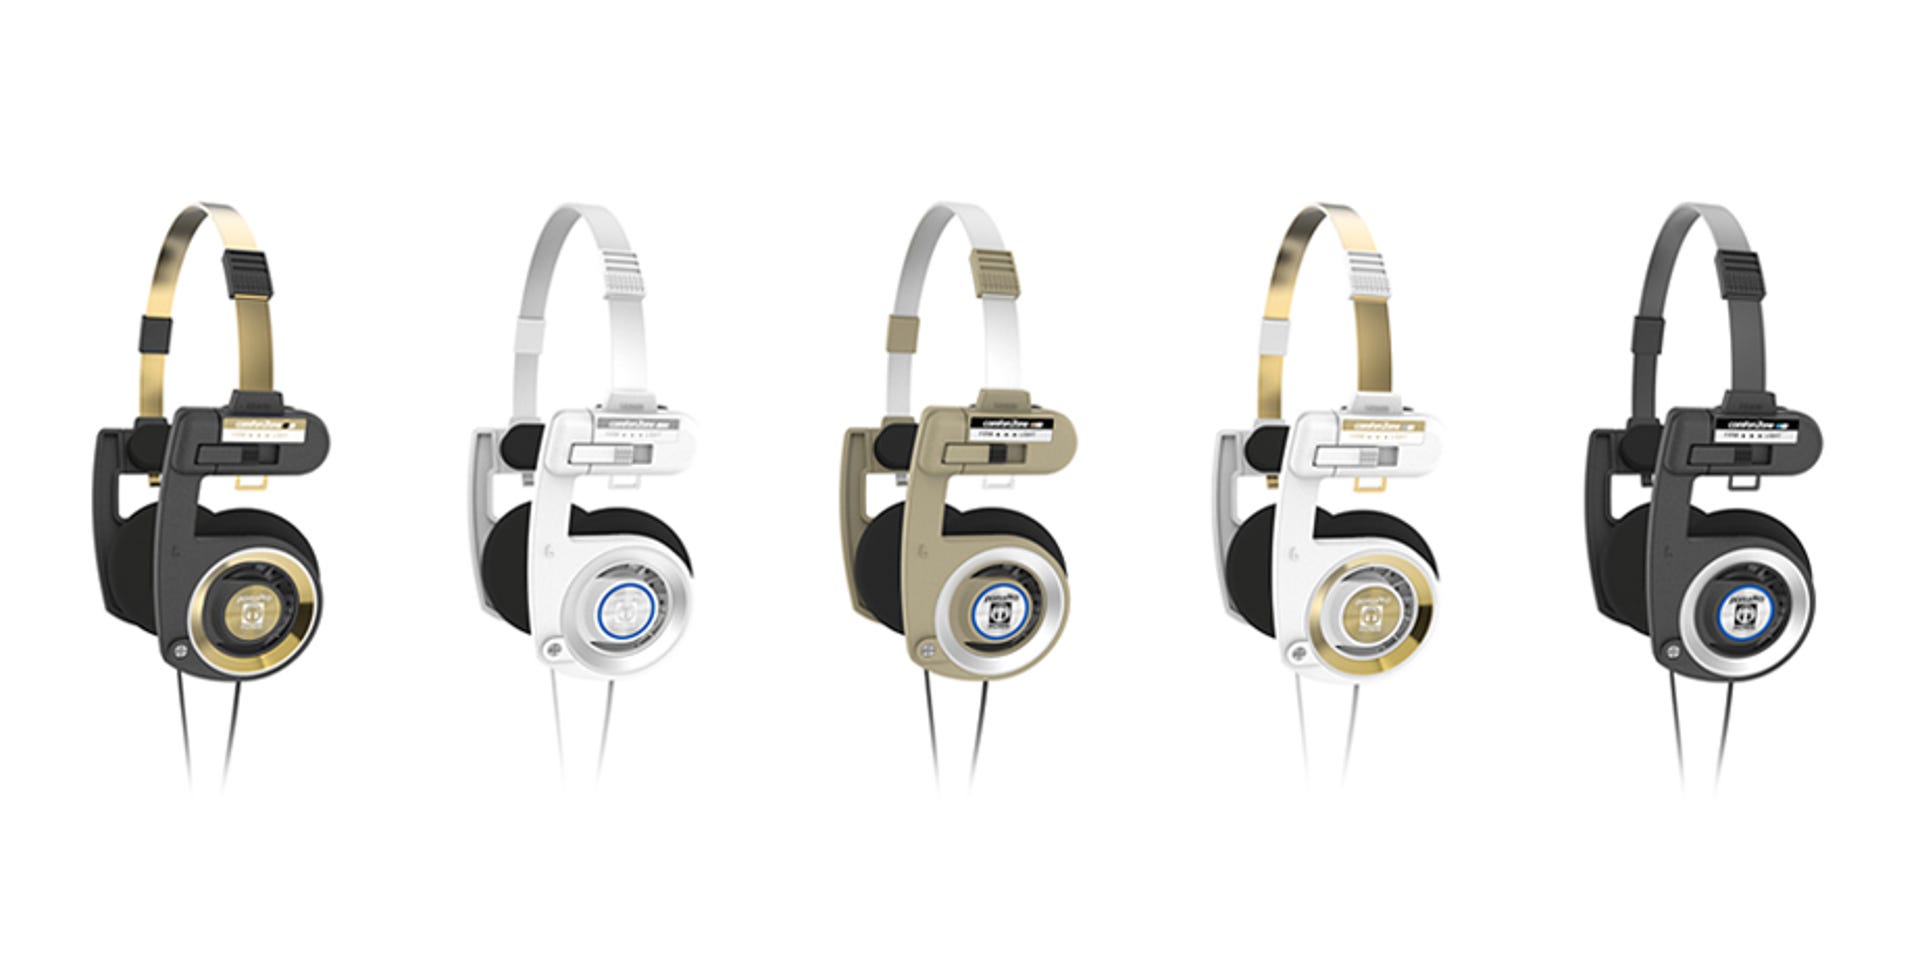 After 32 years, Koss finally considers color options for the Porta Pro  headphones - CNET